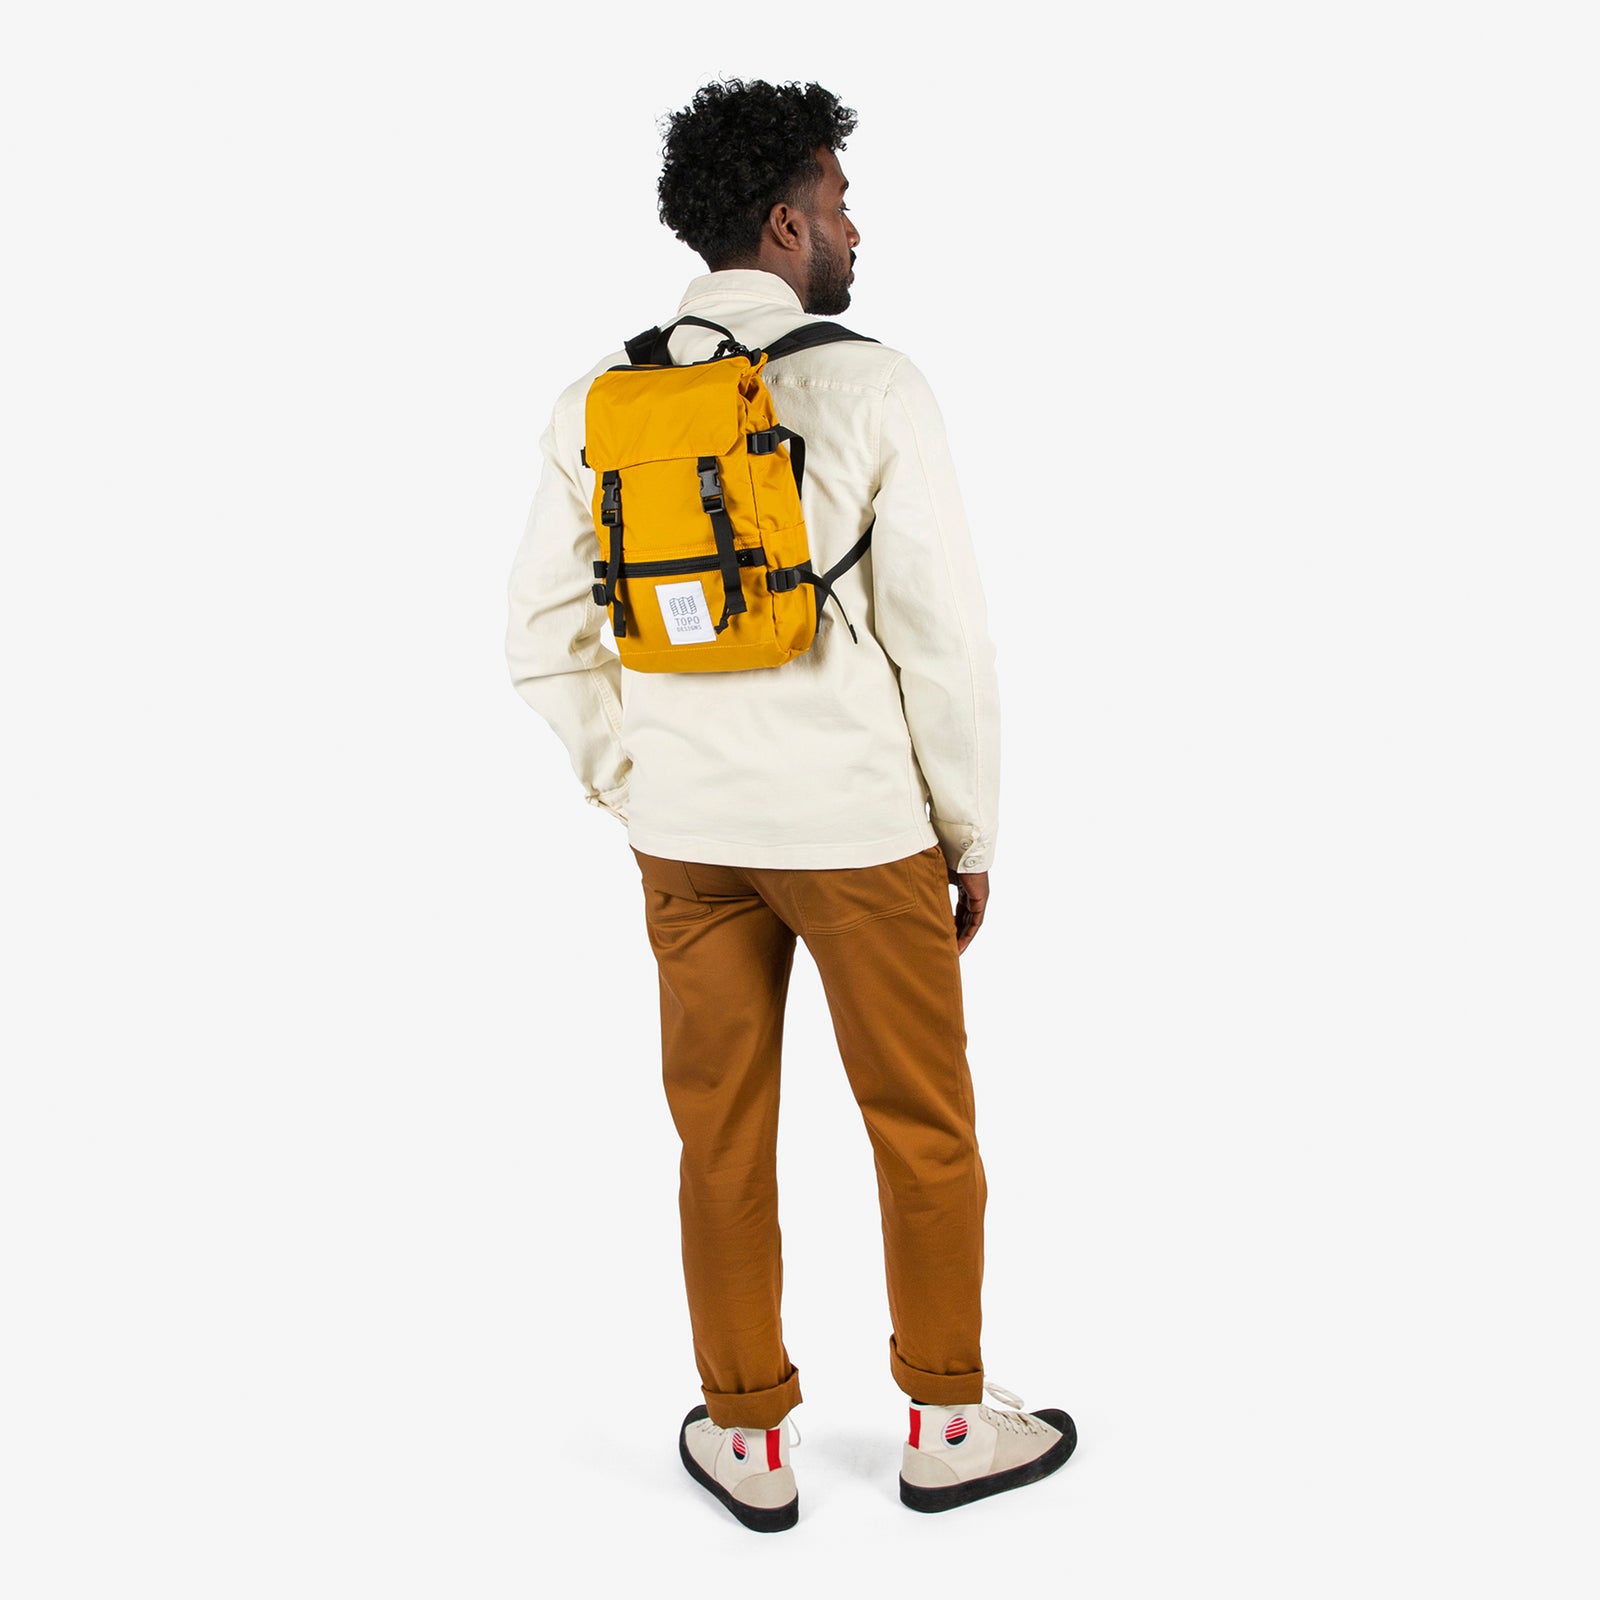 General shot of Topo Designs Rover Pack Mini backpack in "Mustard" yellow worn by model with backpack straps.